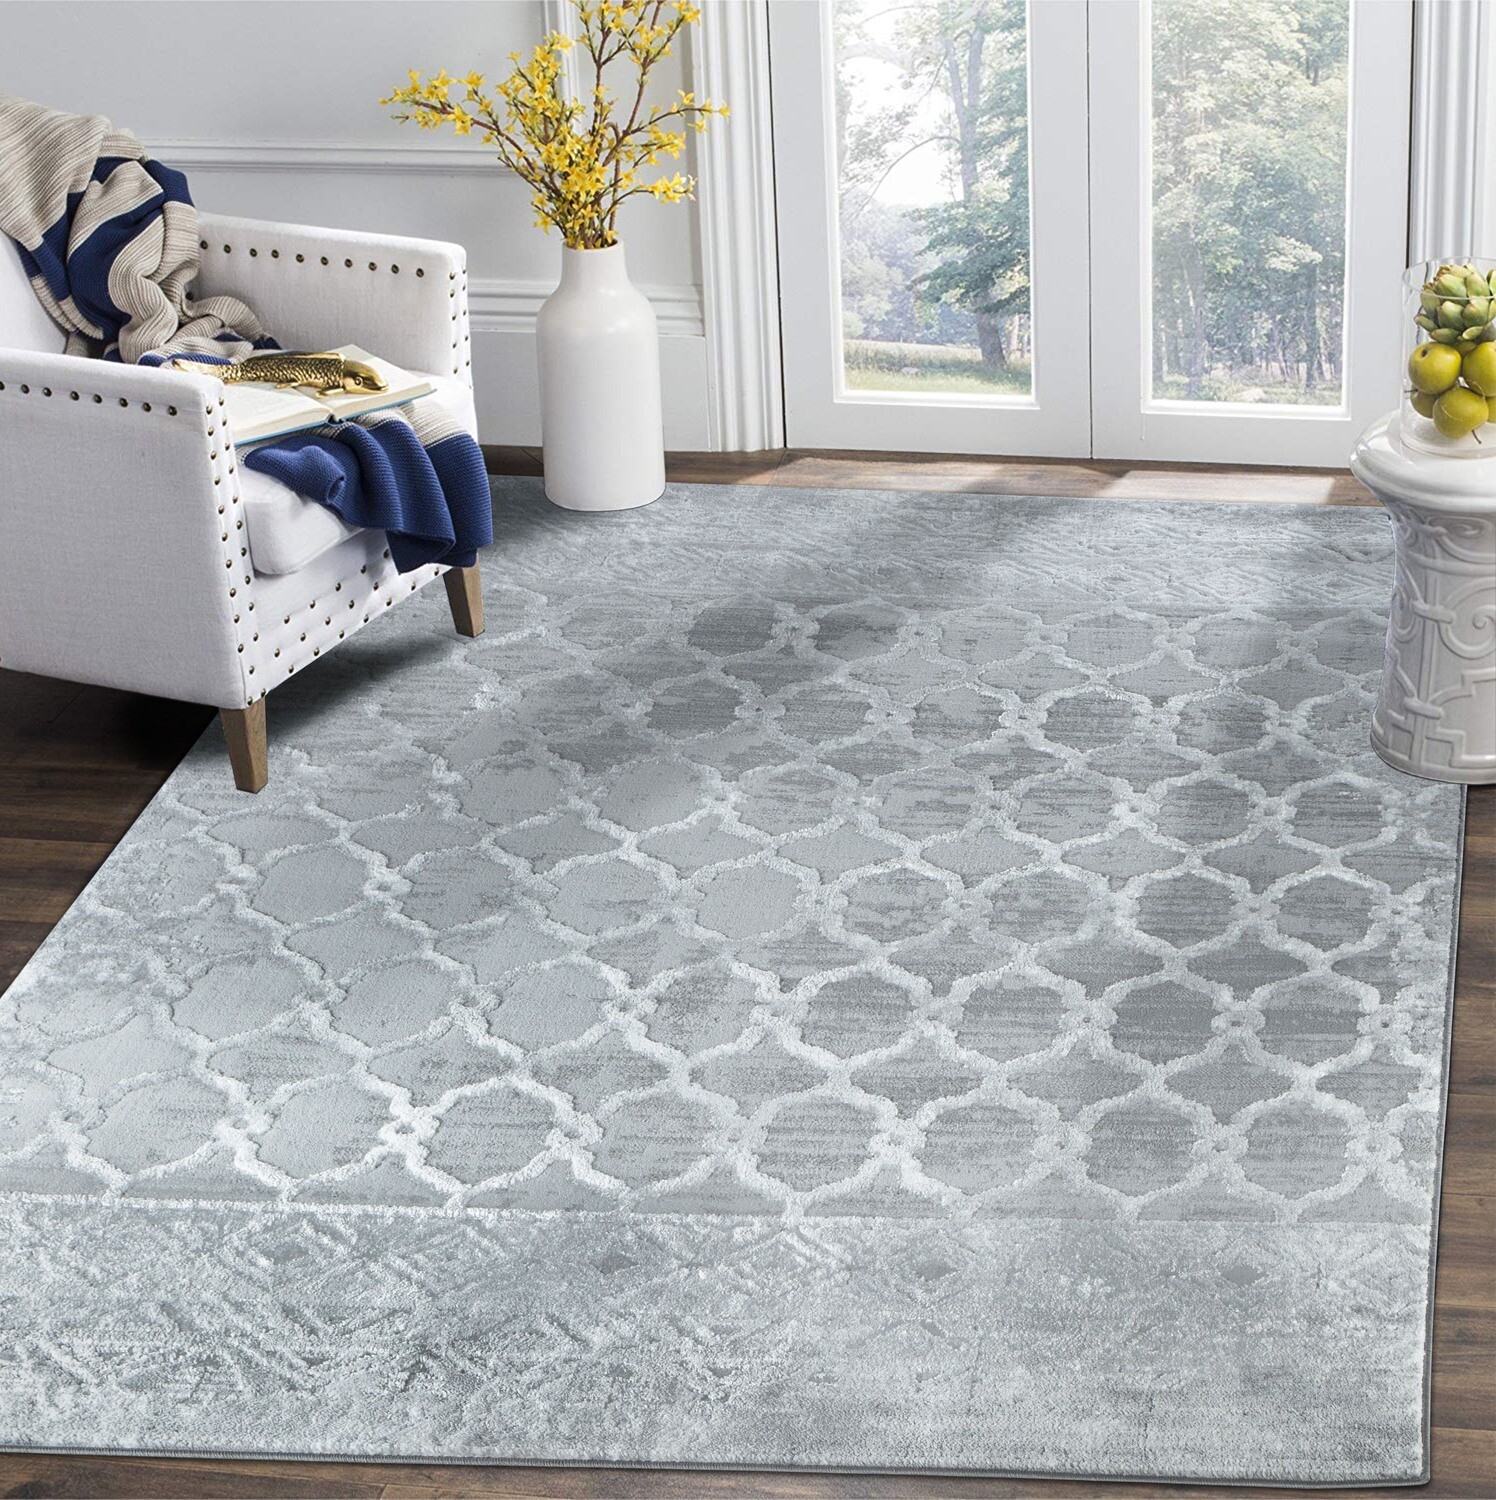 Glory Rugs Modern Abstract Trellis Area Rug Grey Rugs for Home Office Bedroom and Living Room